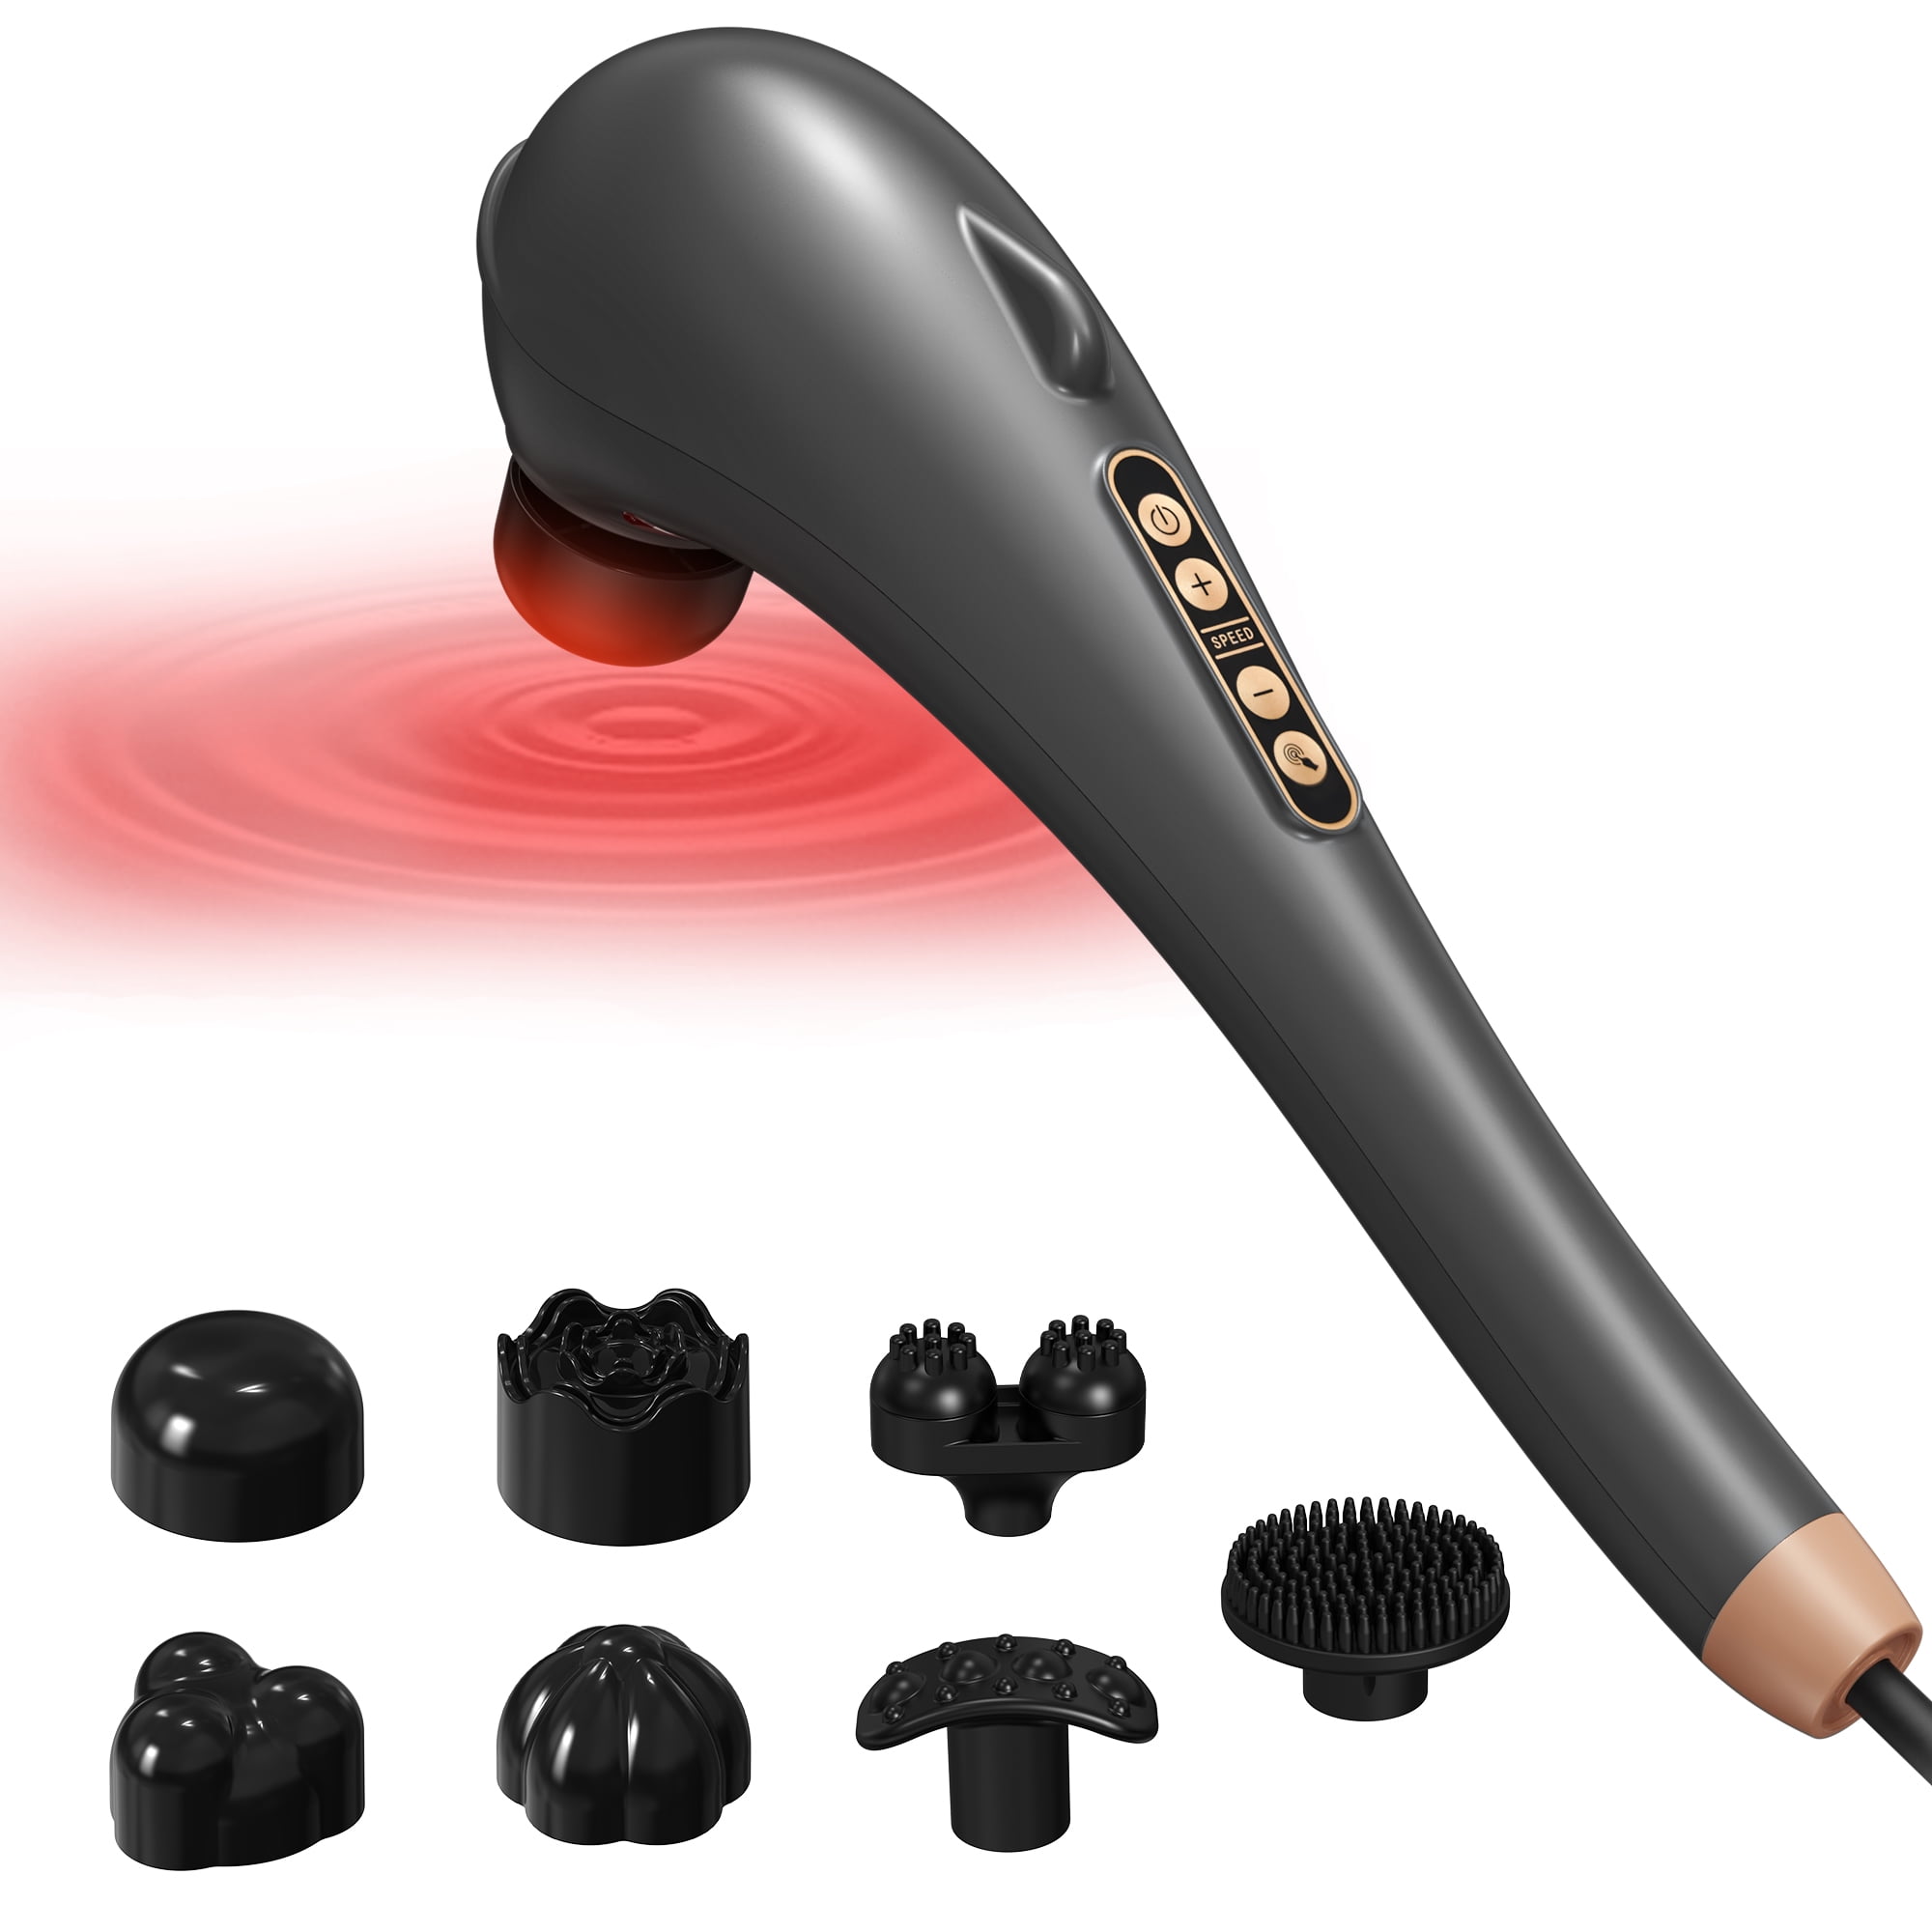 Deep Tissue Massage Gun, Electric Muscle Massager, Handheld Massager for  Muscle Deep Relaxation, Portable Body Neck Back - Bed Bath & Beyond -  36866004